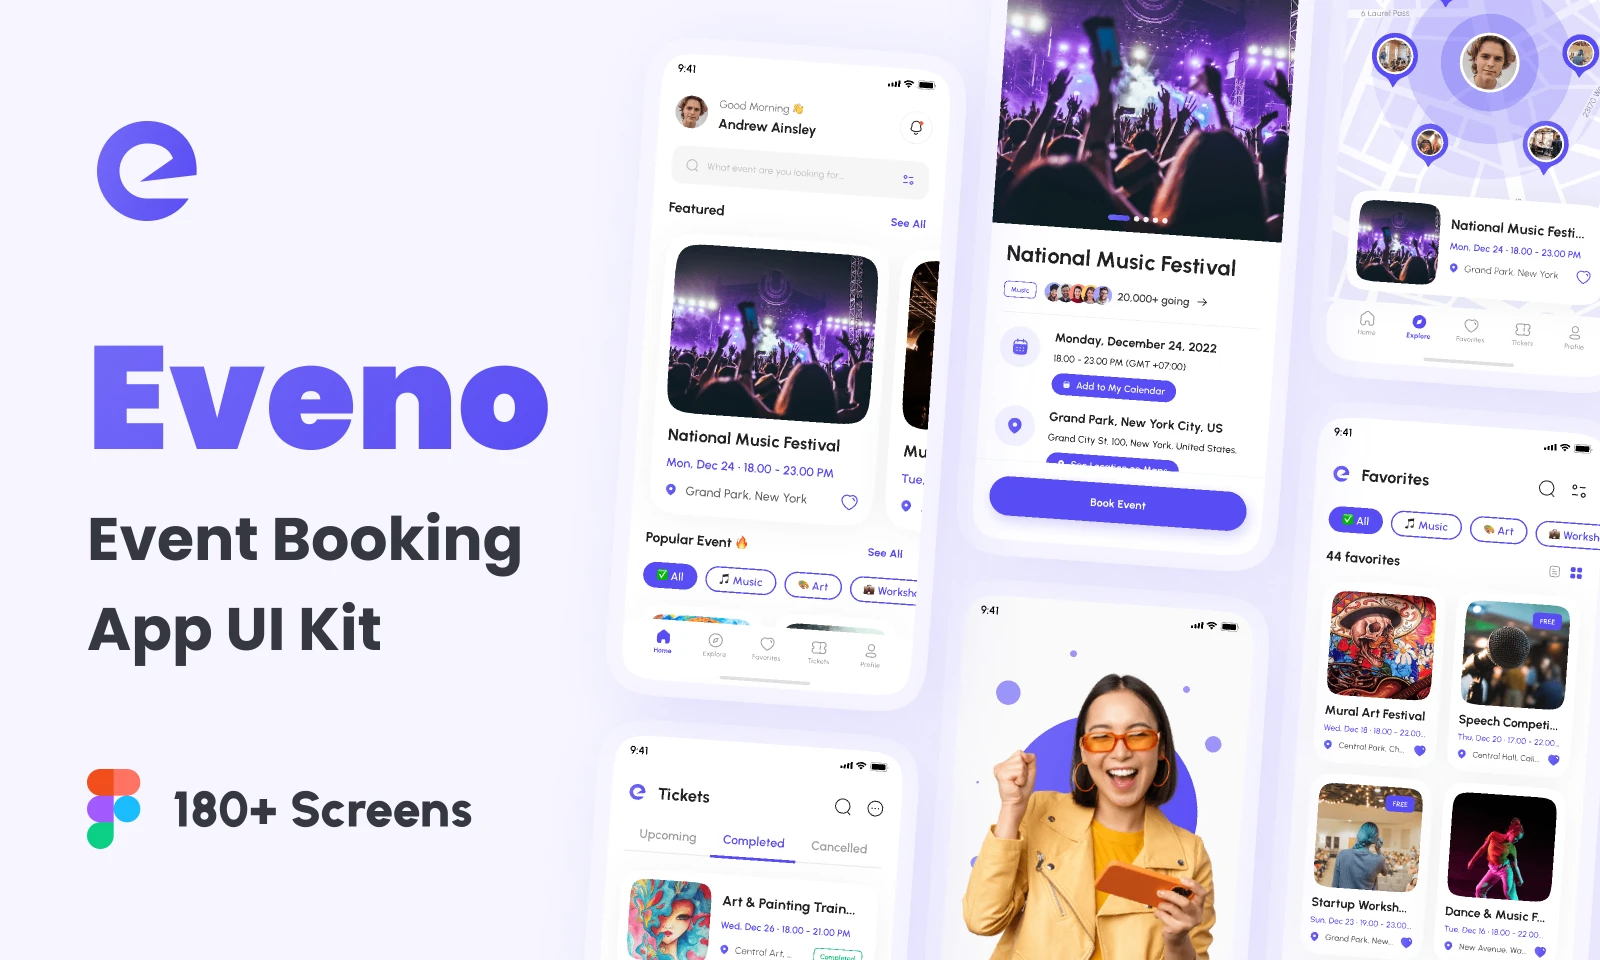 Eveno - Event Booking App UI Kit for Figma and Adobe XD